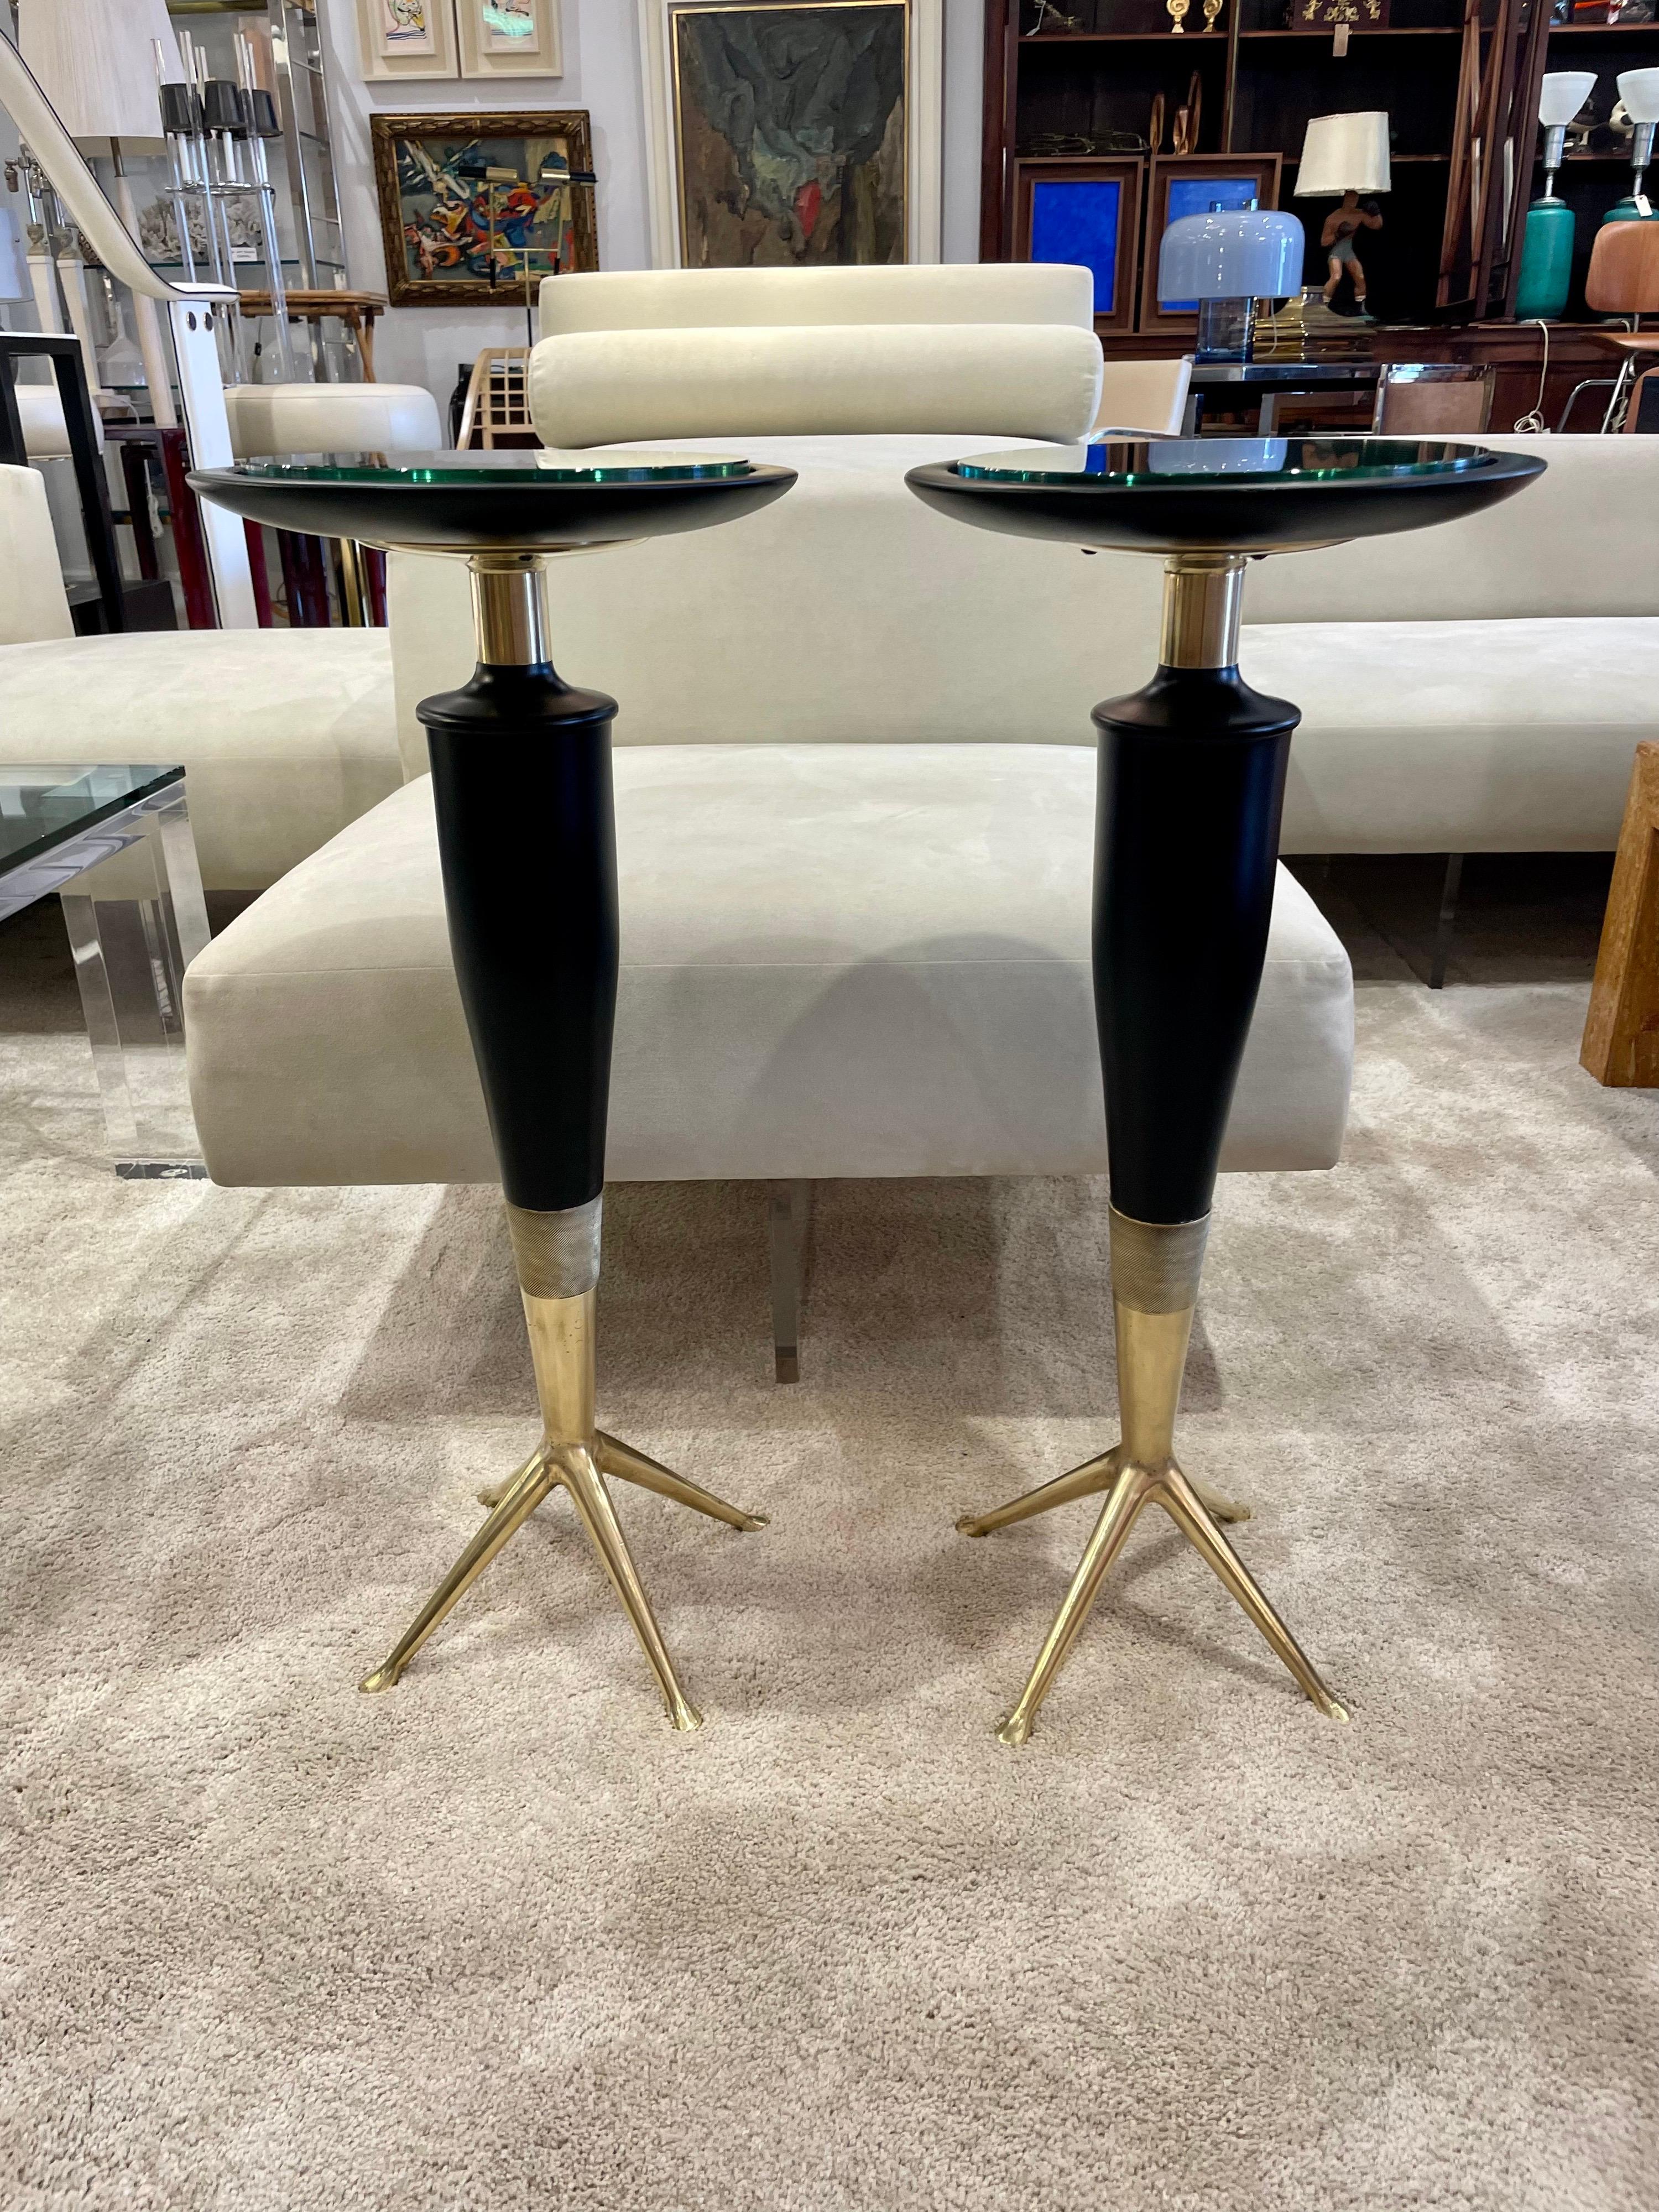 In the Manner of Gio Ponti, these outstanding drinks tables with a plateau in wood and glass inset to protect the ebonized table tops. Three wonderful legs in bronze and details abound - making these little beauties a MUST HAVE! Dimensions: 28.5